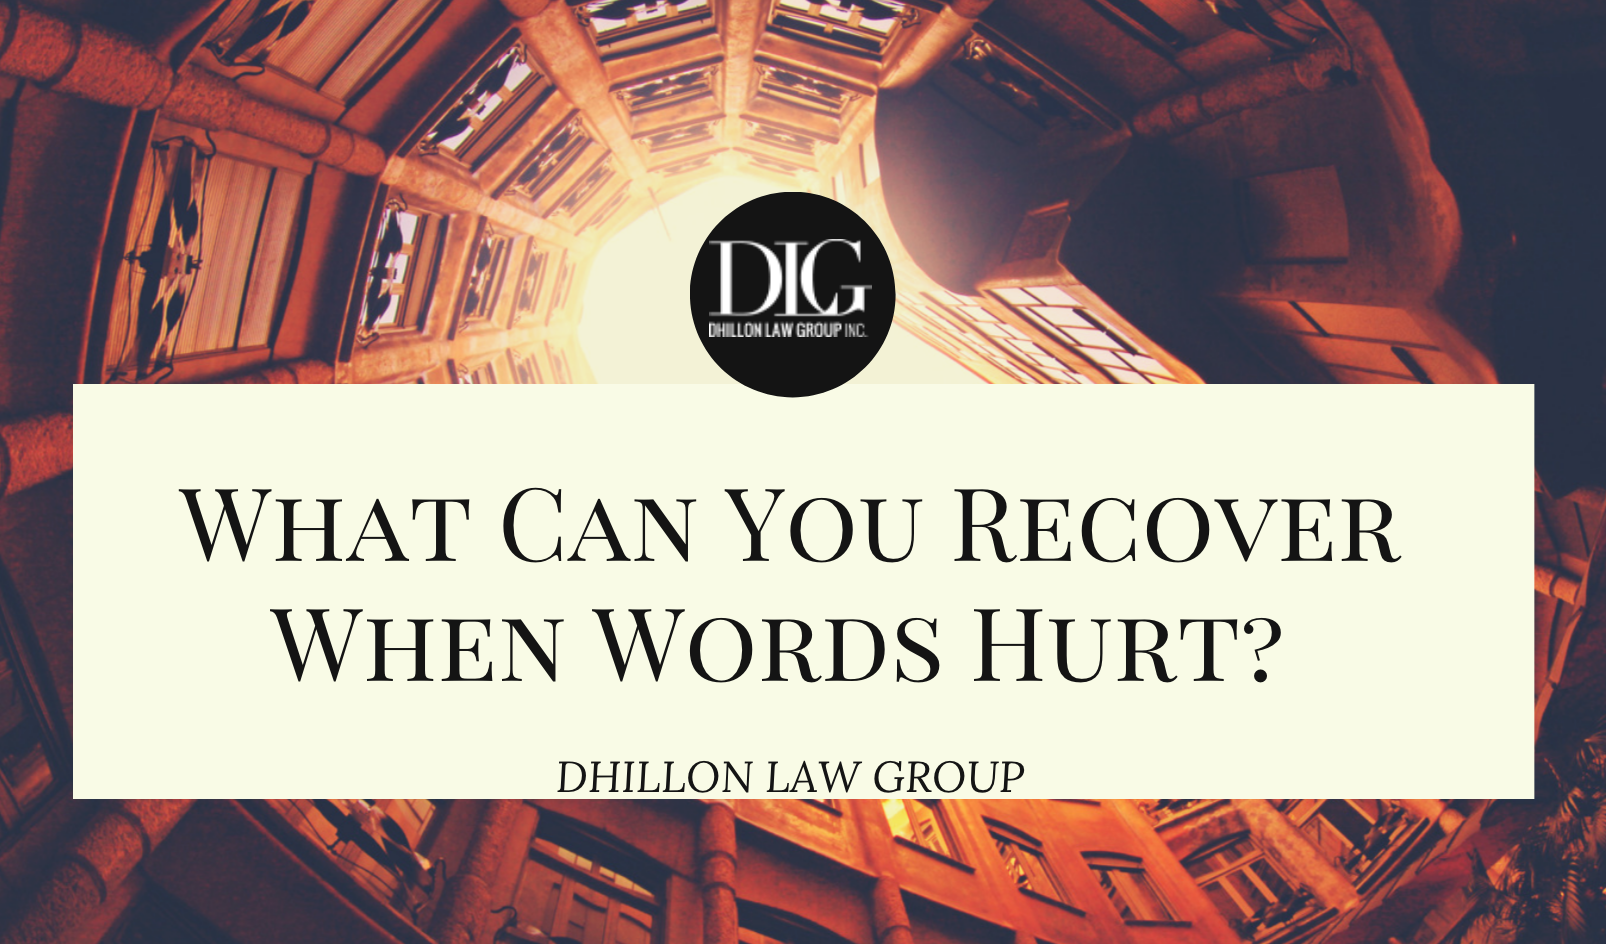 What can you recover when words hurt